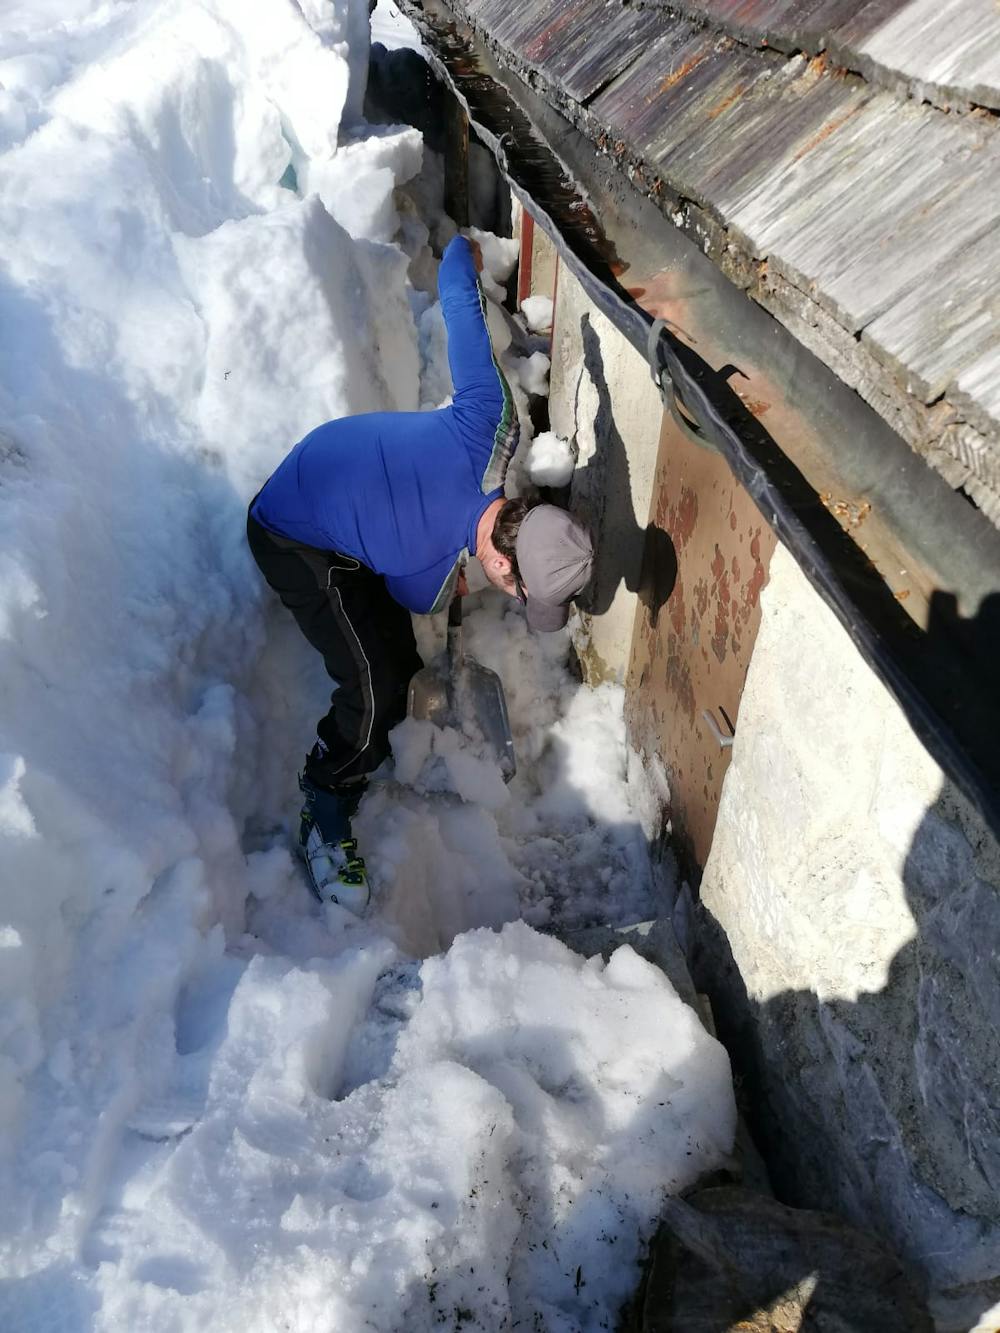 Digging out the hut!